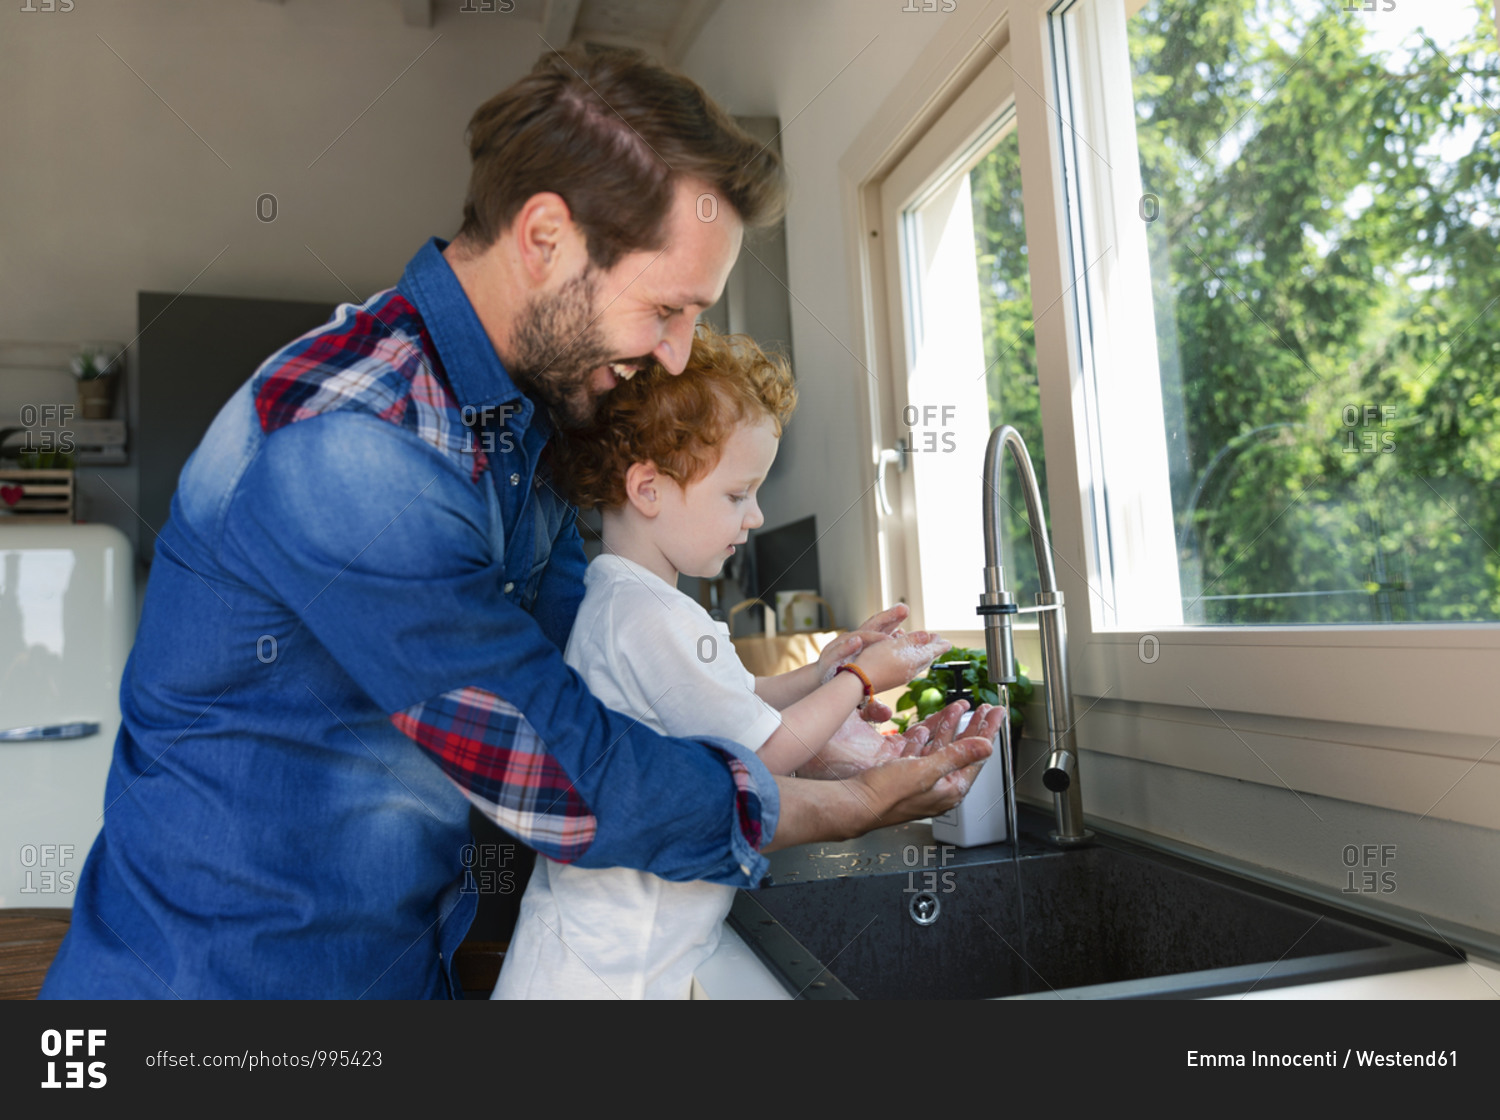 Smiling man washing hands with son in kitchen sink at home